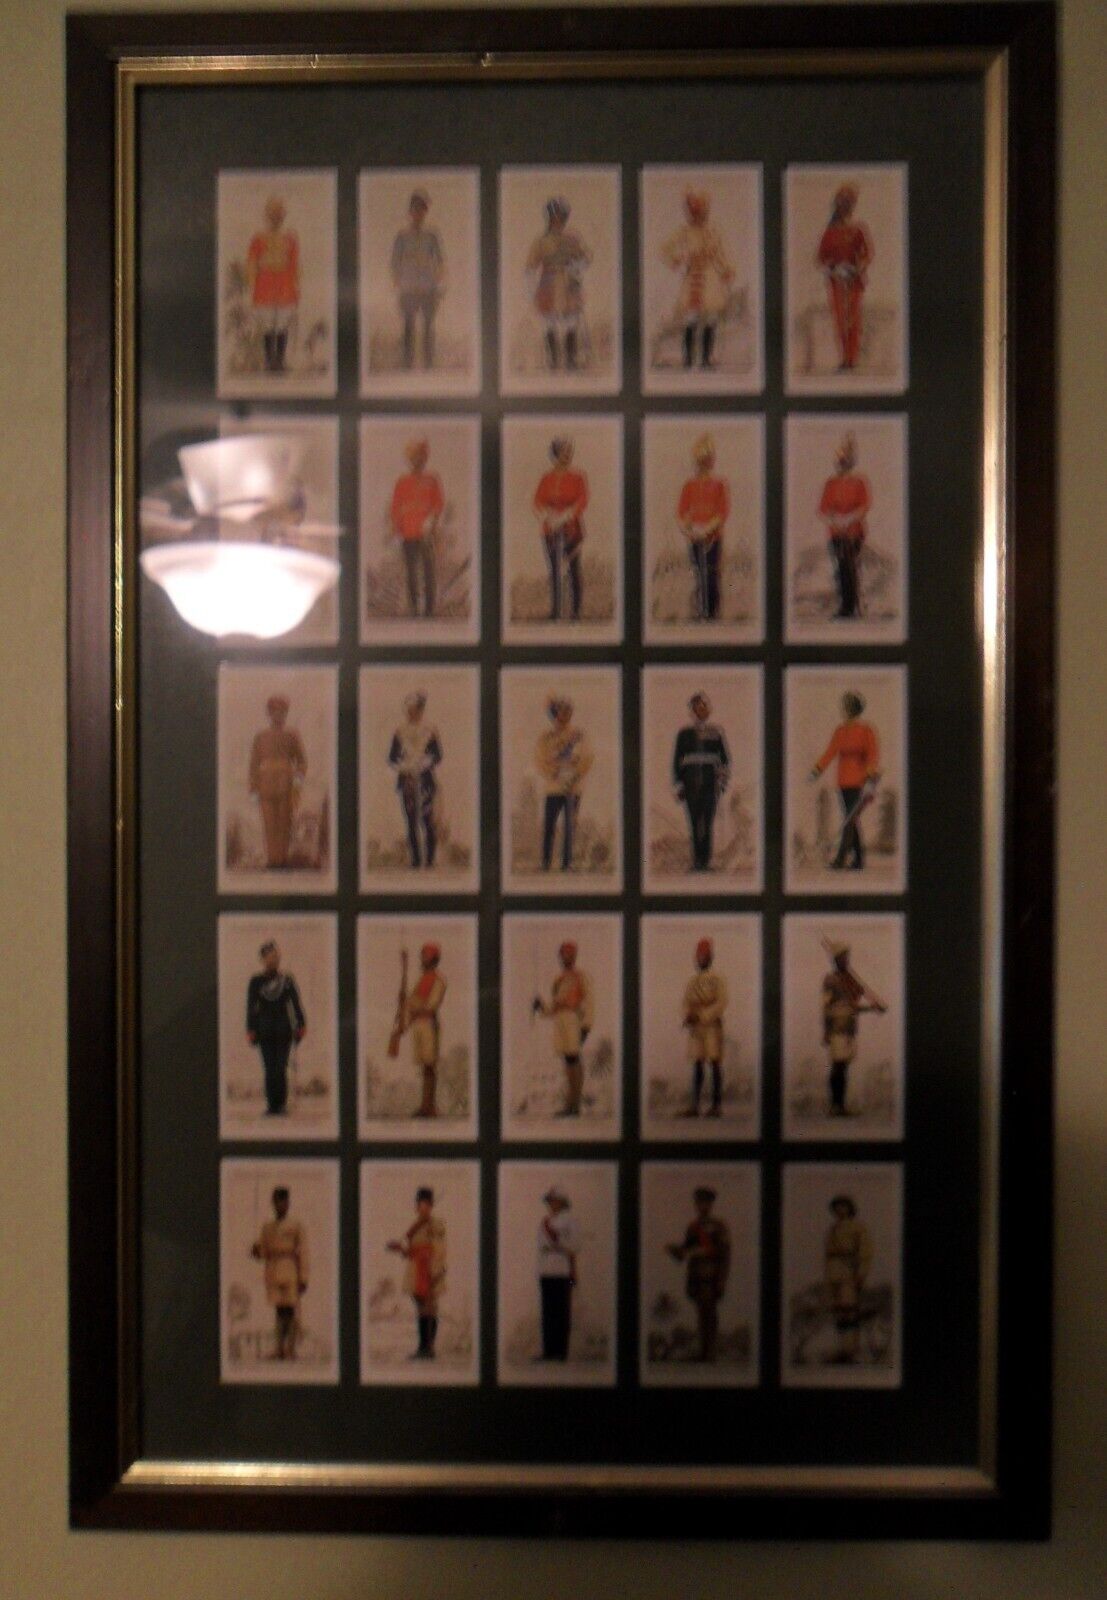 Military Uniforms of the British Empire\', framed Players Cards set.